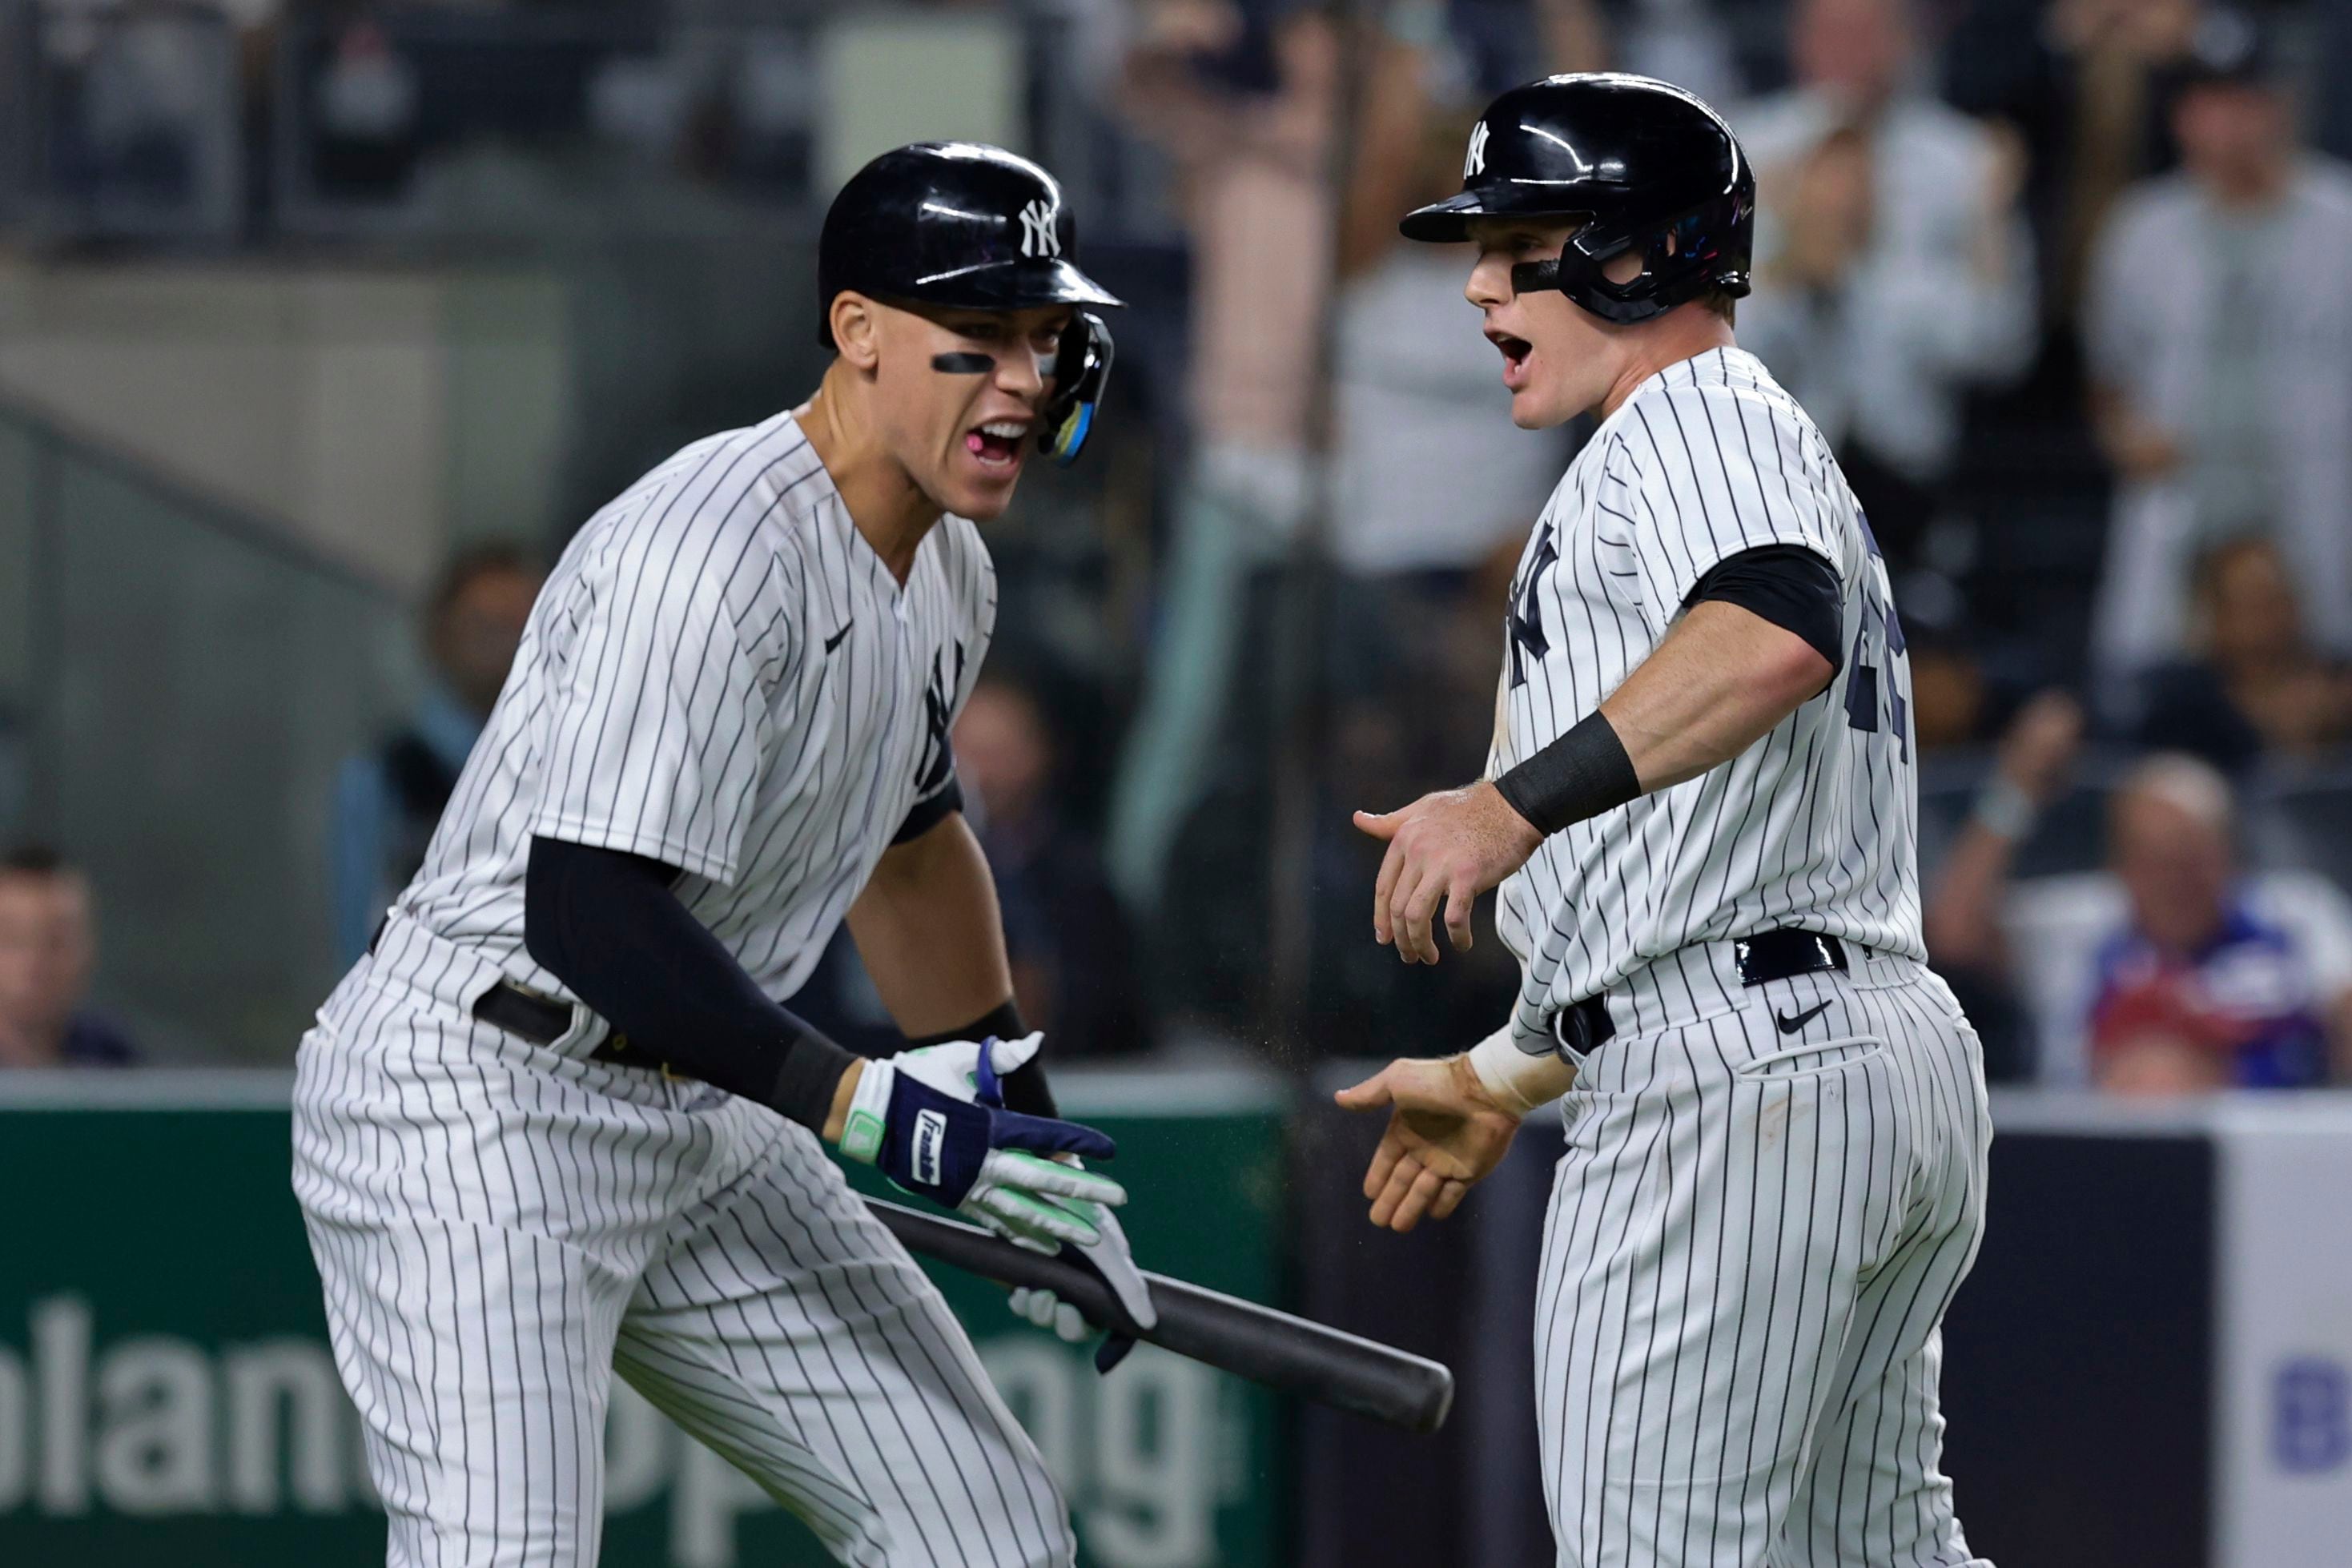 Aaron Judge stuck on 60 homers as Yankees clinch division - FISM TV